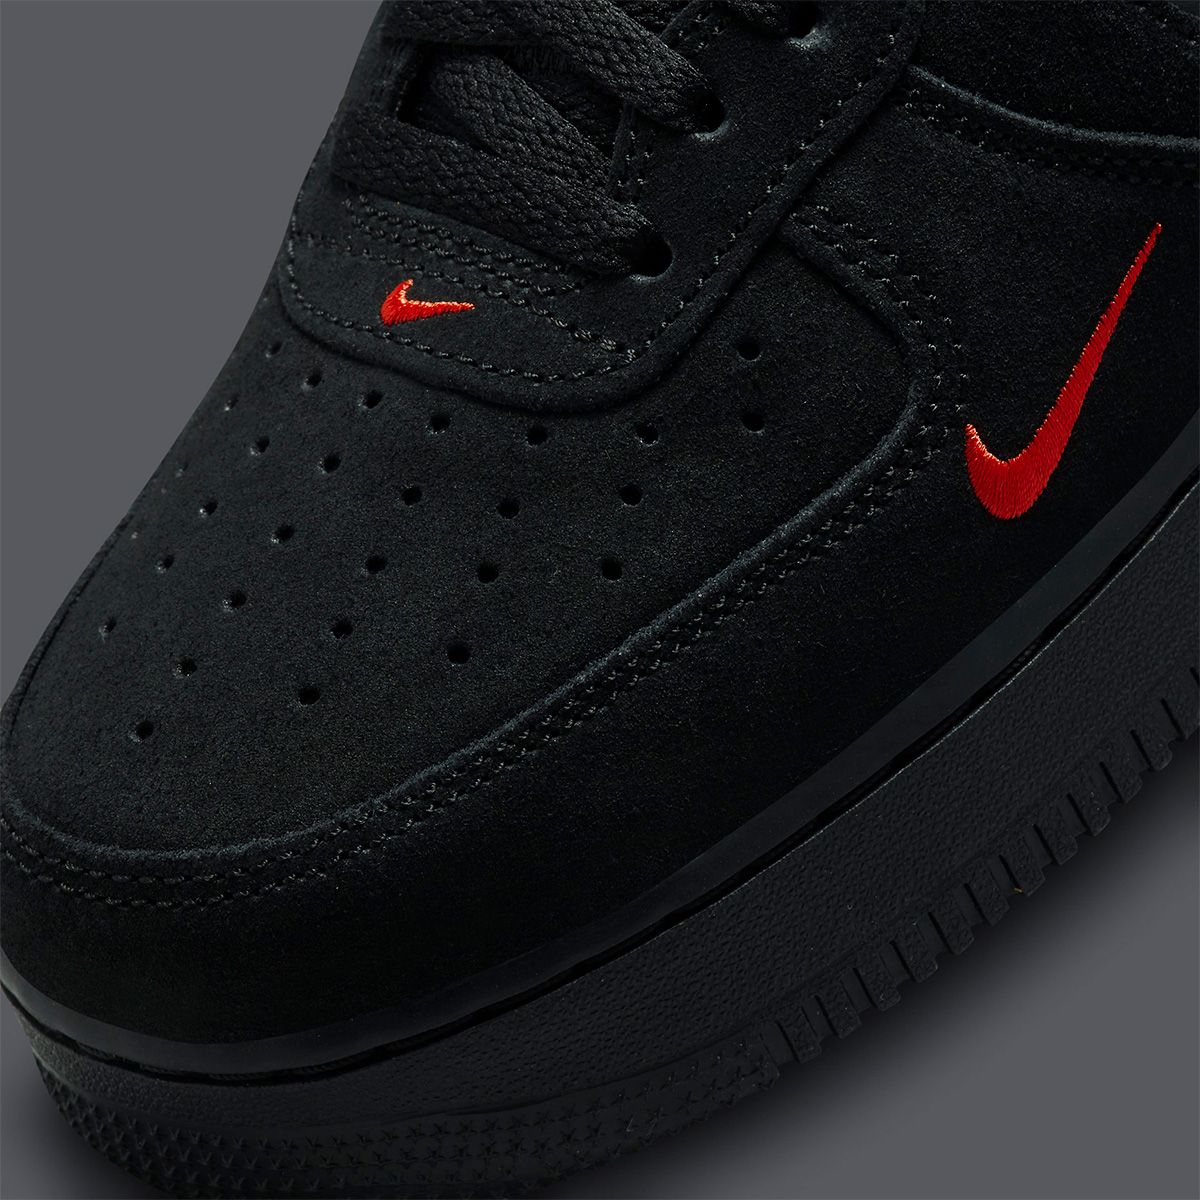 air force 1 reflective black